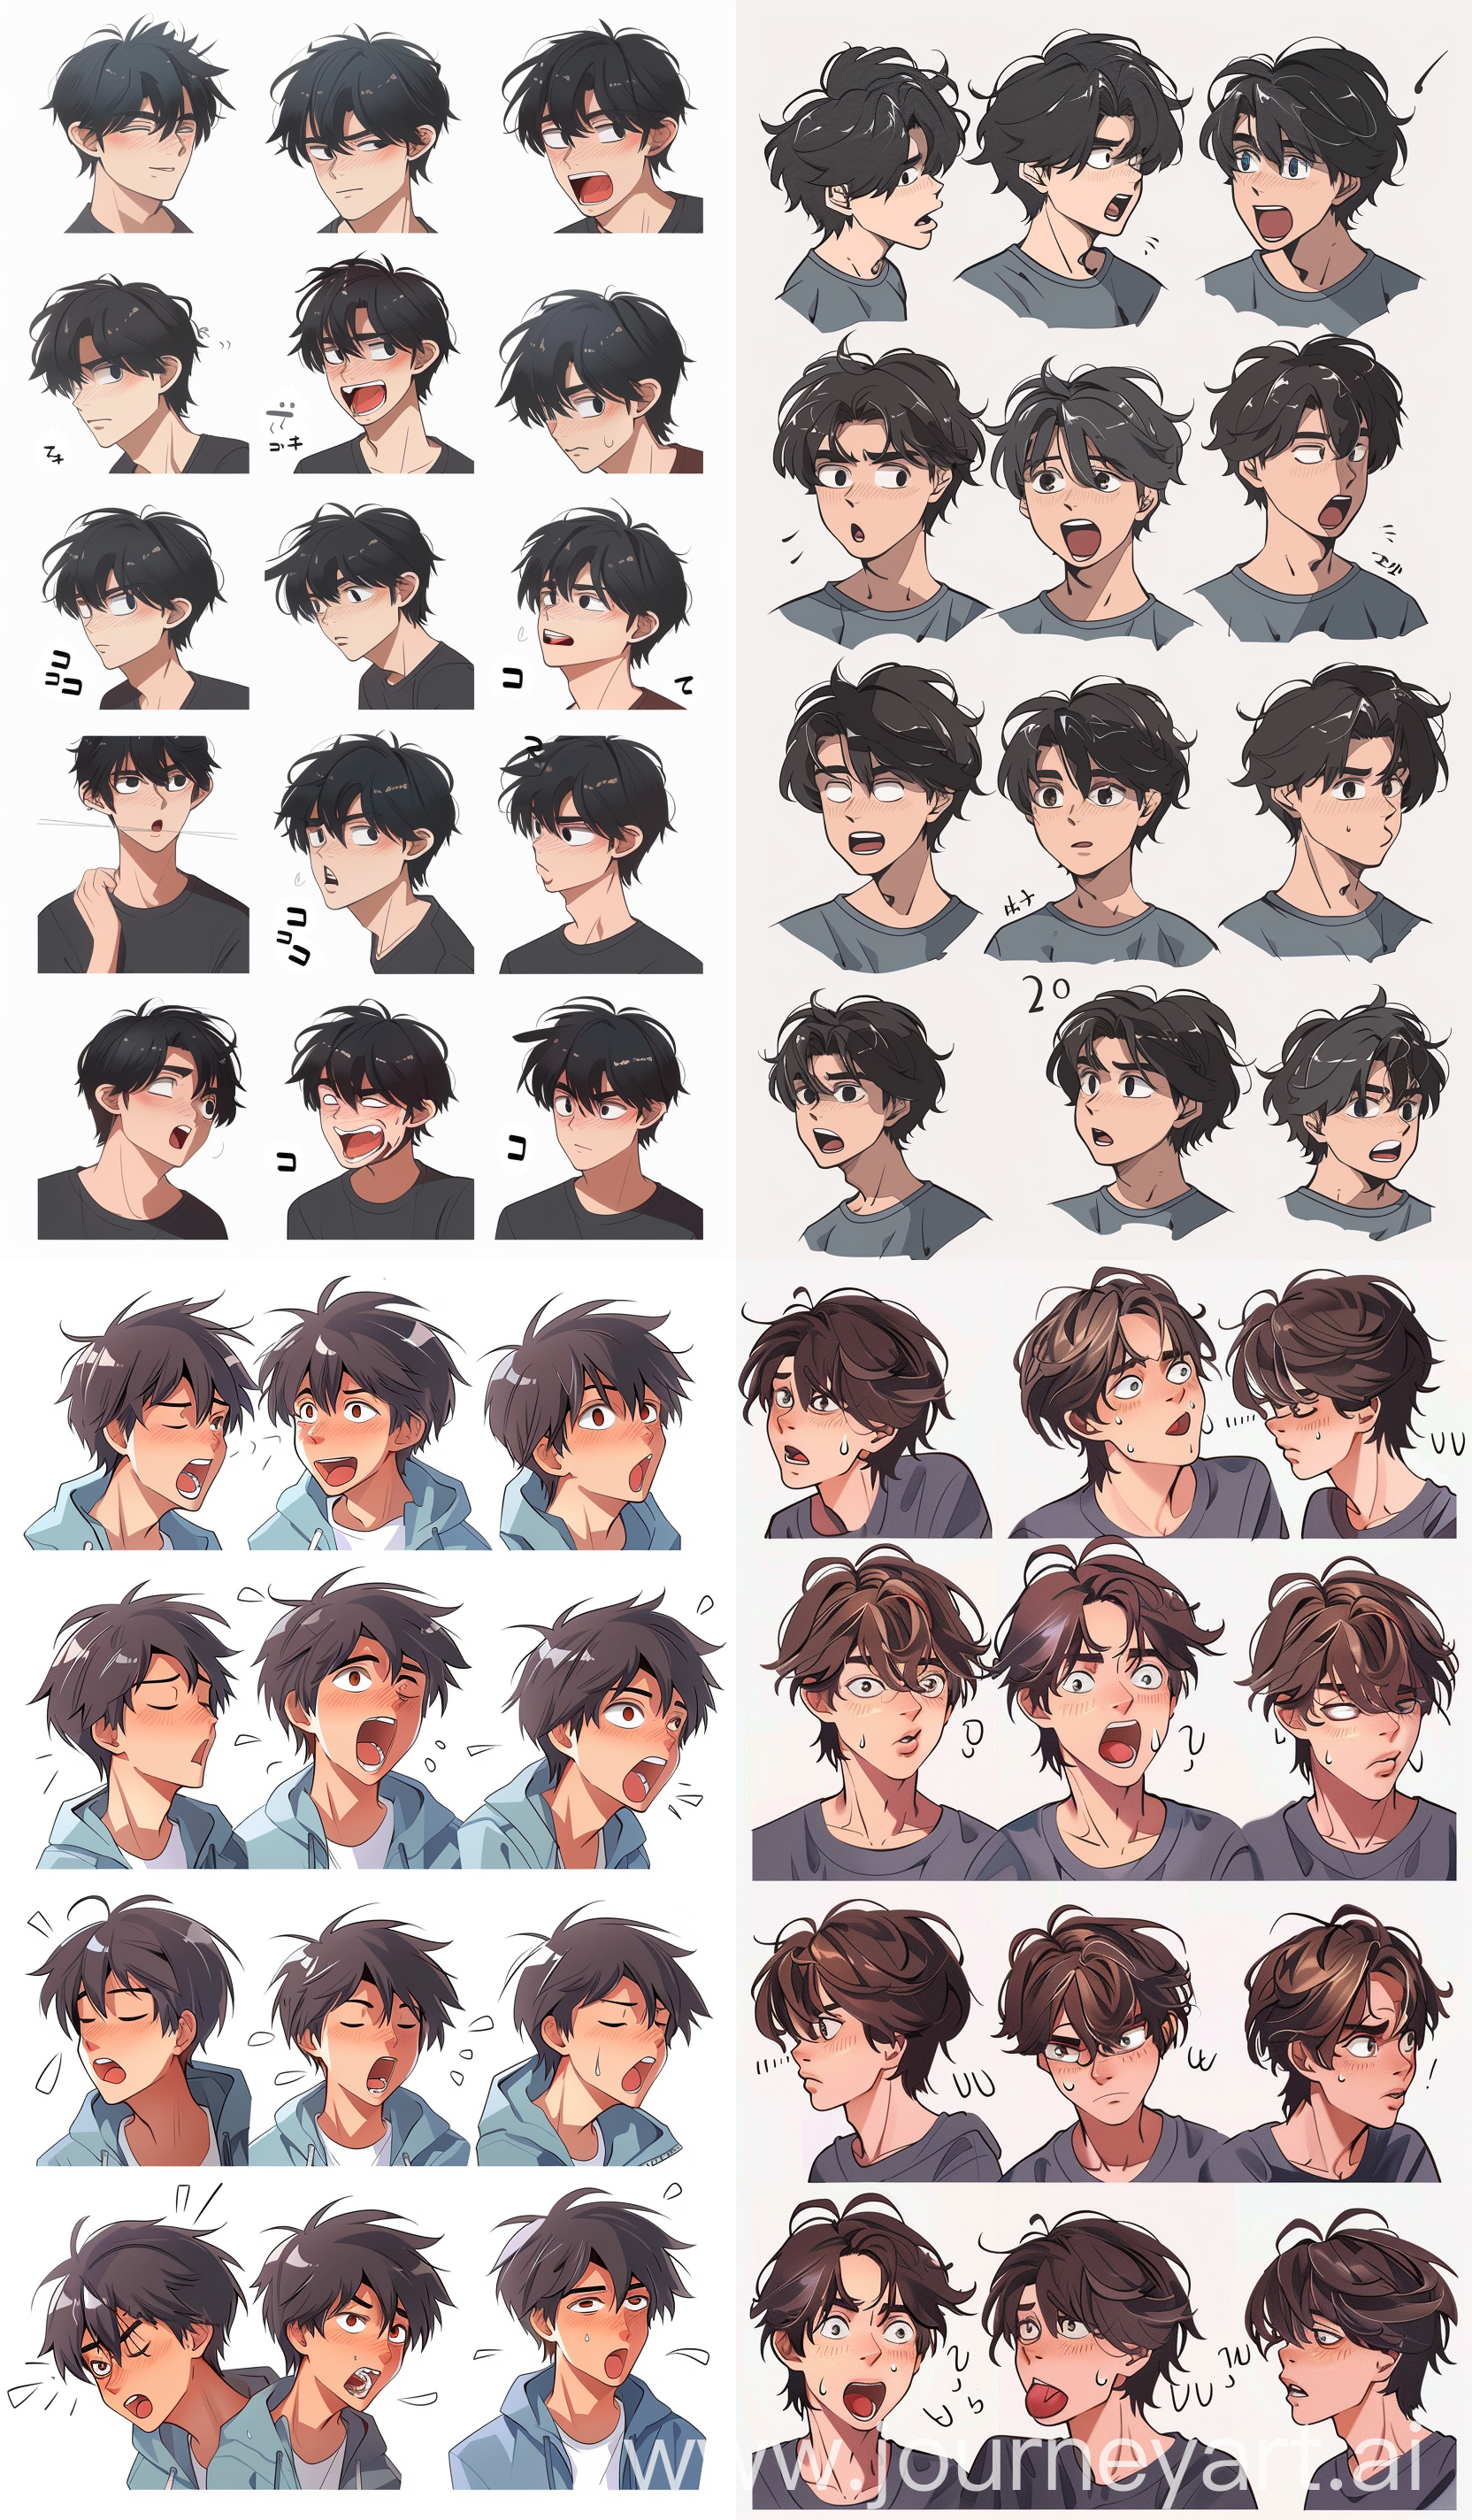 anime style,a boy character images various expressions,20 different pose,lip movement,a set of images,no hyper realistic --ar 10:17 